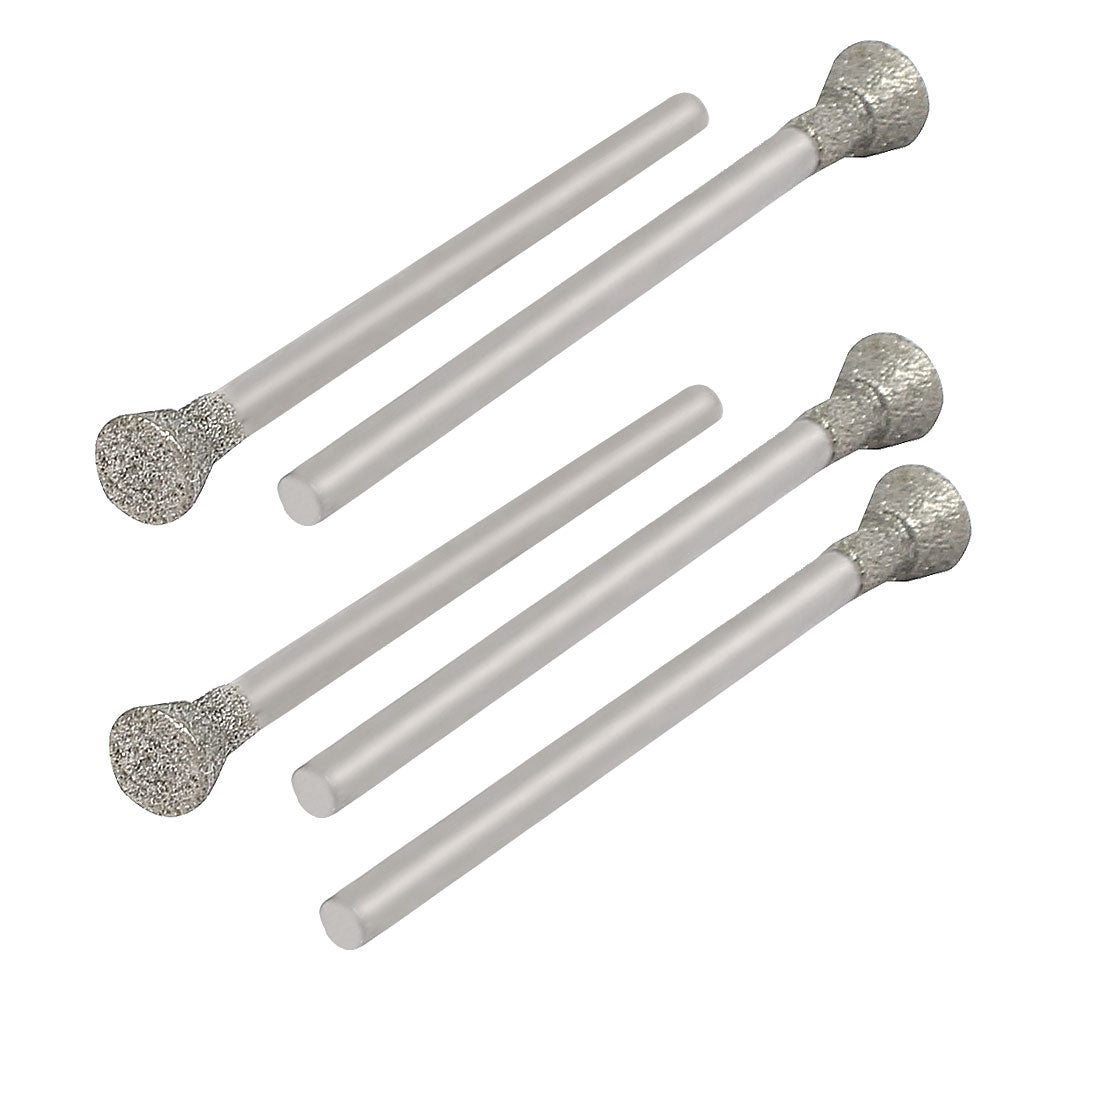 uxcell Uxcell 2.35mmx5mm Diamond Coated Inverted Cone Mounted Points Grinding Bits 5pcs